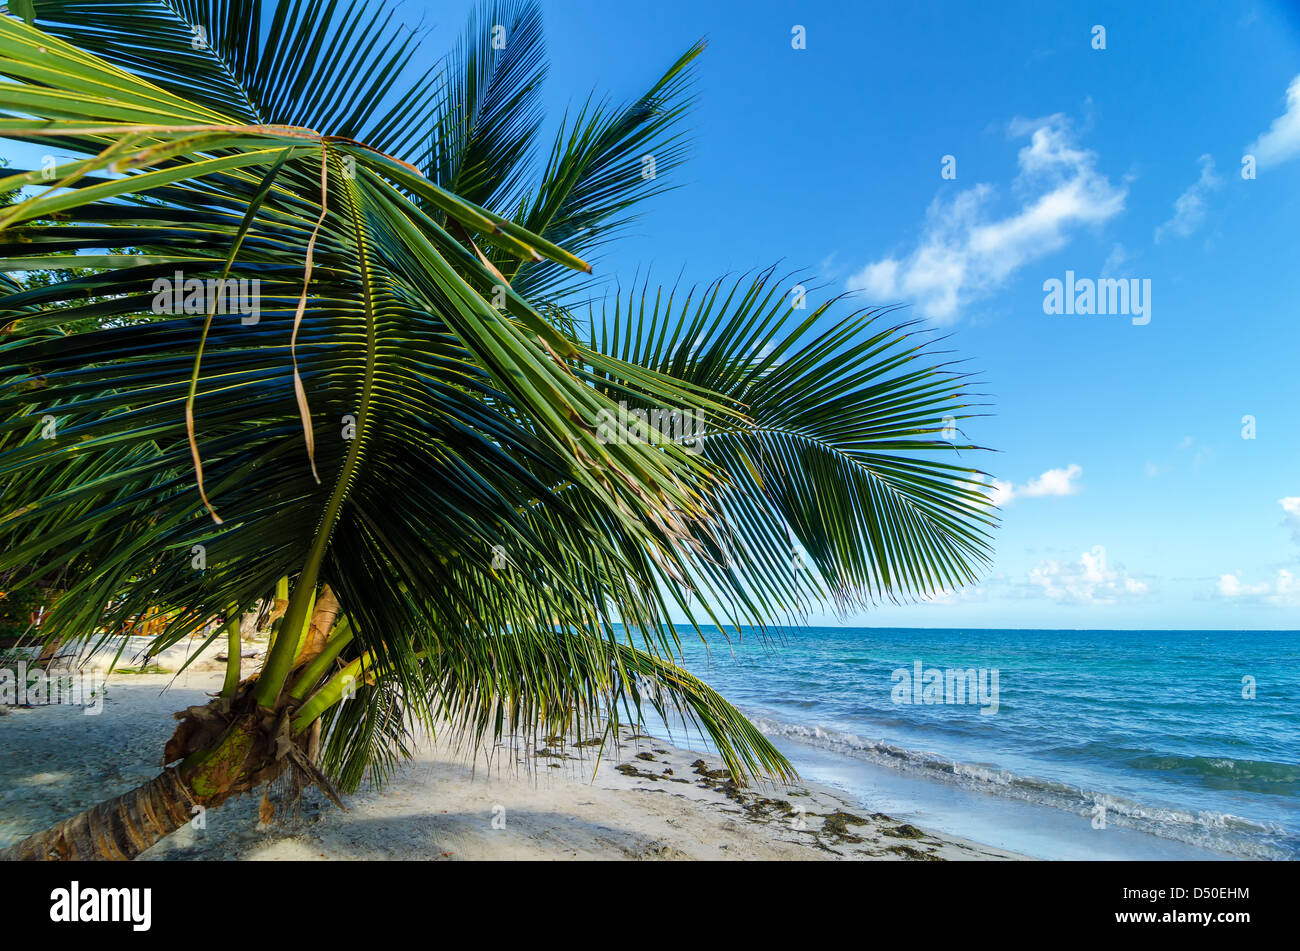 A small palm tree extending over the beach in San Andres y Providencia, Colombia Stock Photo